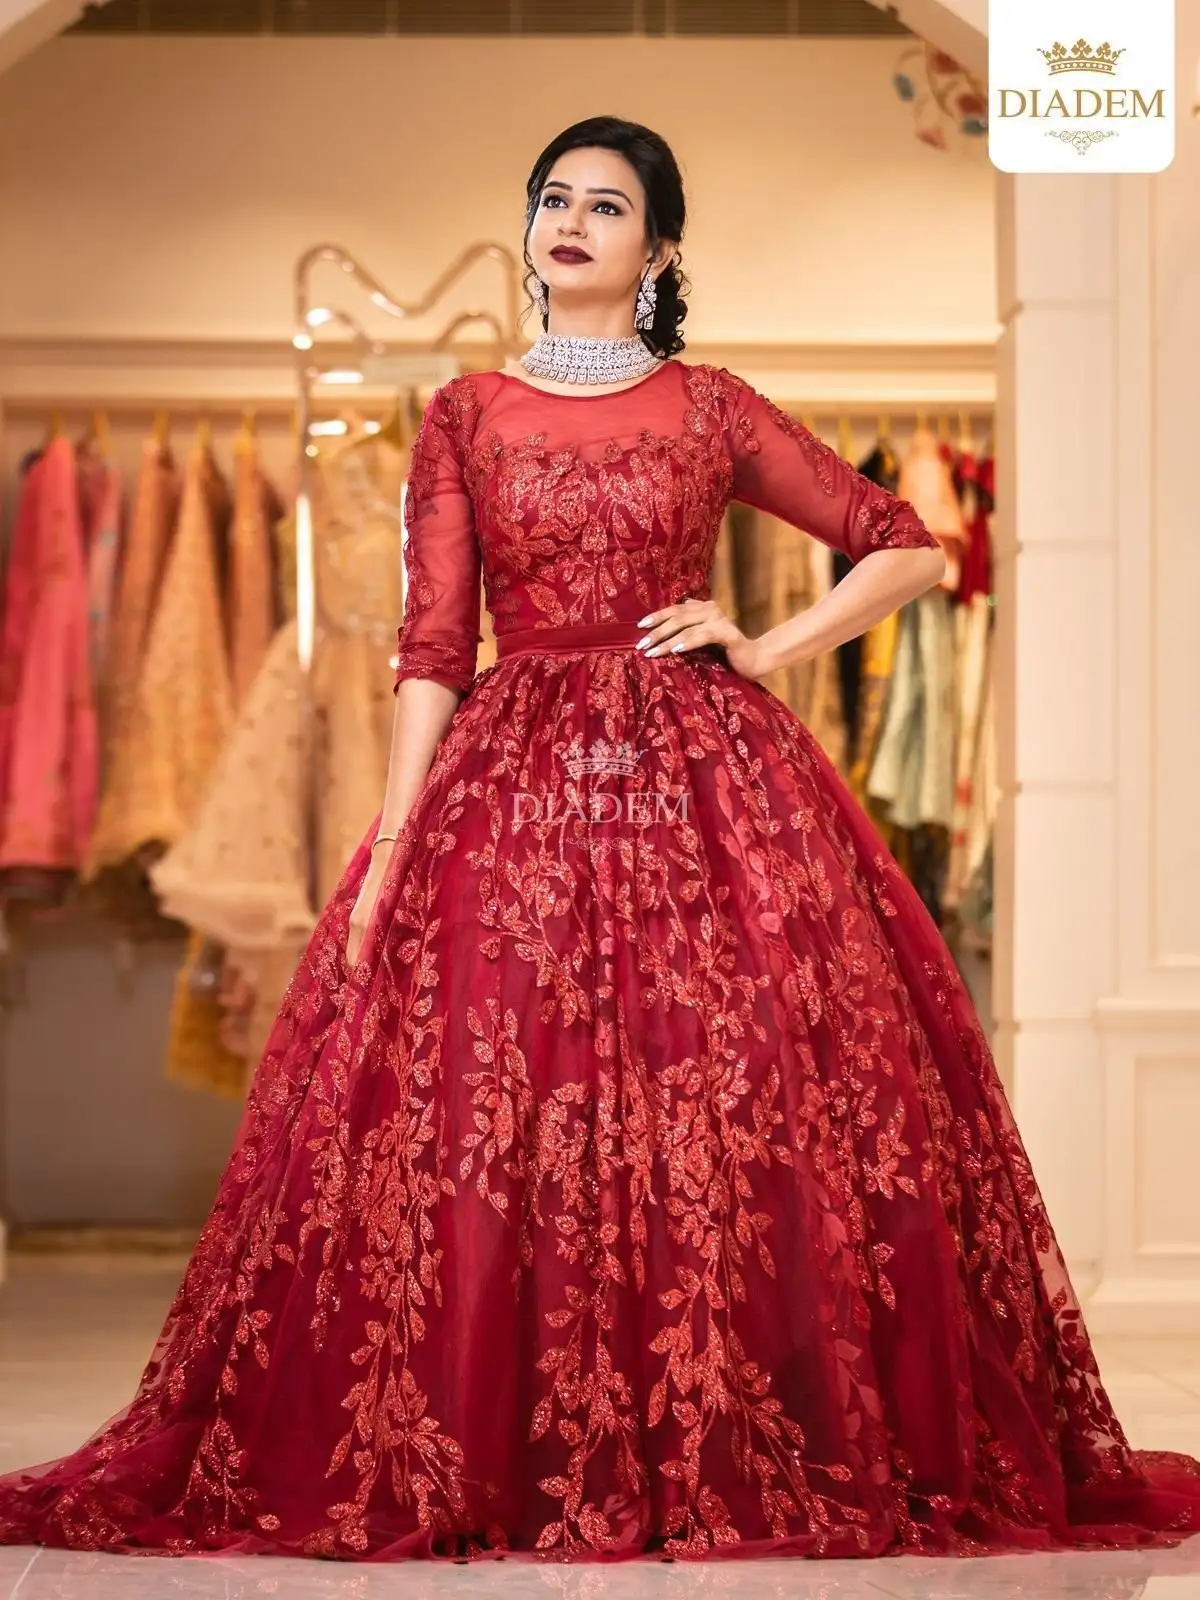 Red Ball Gown Embellished with Floral Laces and Beads